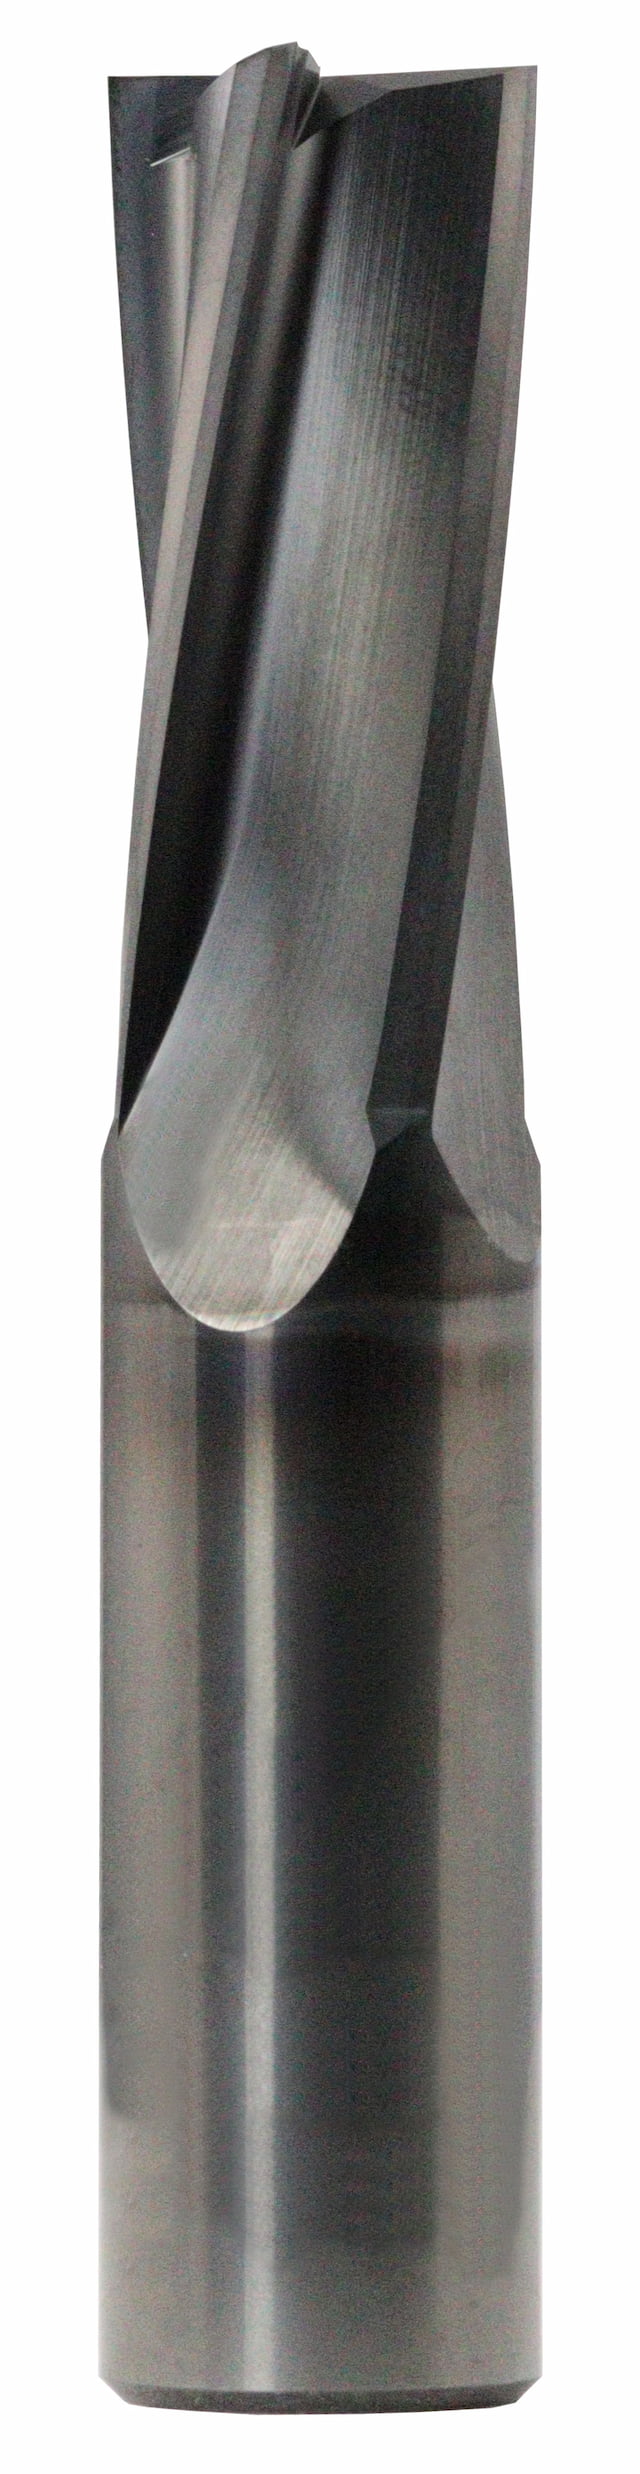 10.00mm Dia, 4 Flute, Square End End Mill - 83060